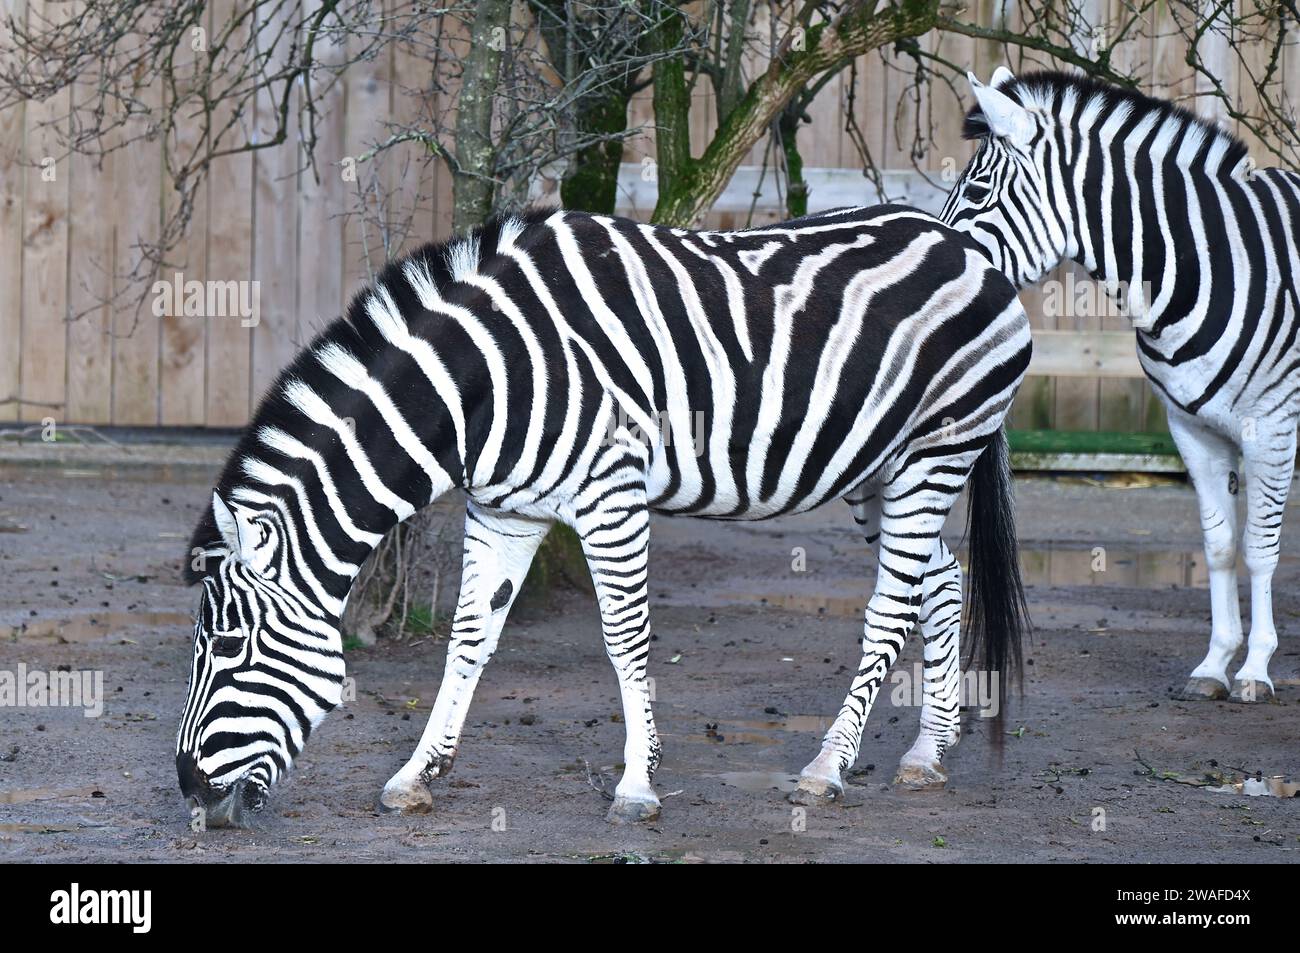 The Chapman’s zebra is a medium subspecies of the zebra group. With some of the most famously patterned coats in the world, no two zebras ever have the same stripe pattern, and Chapman's zebras have faint brown stripes between their black stripes.  Zebras may have evolved stripes for social recognition or to confuse and dazzle predators such as lions. Stock Photo